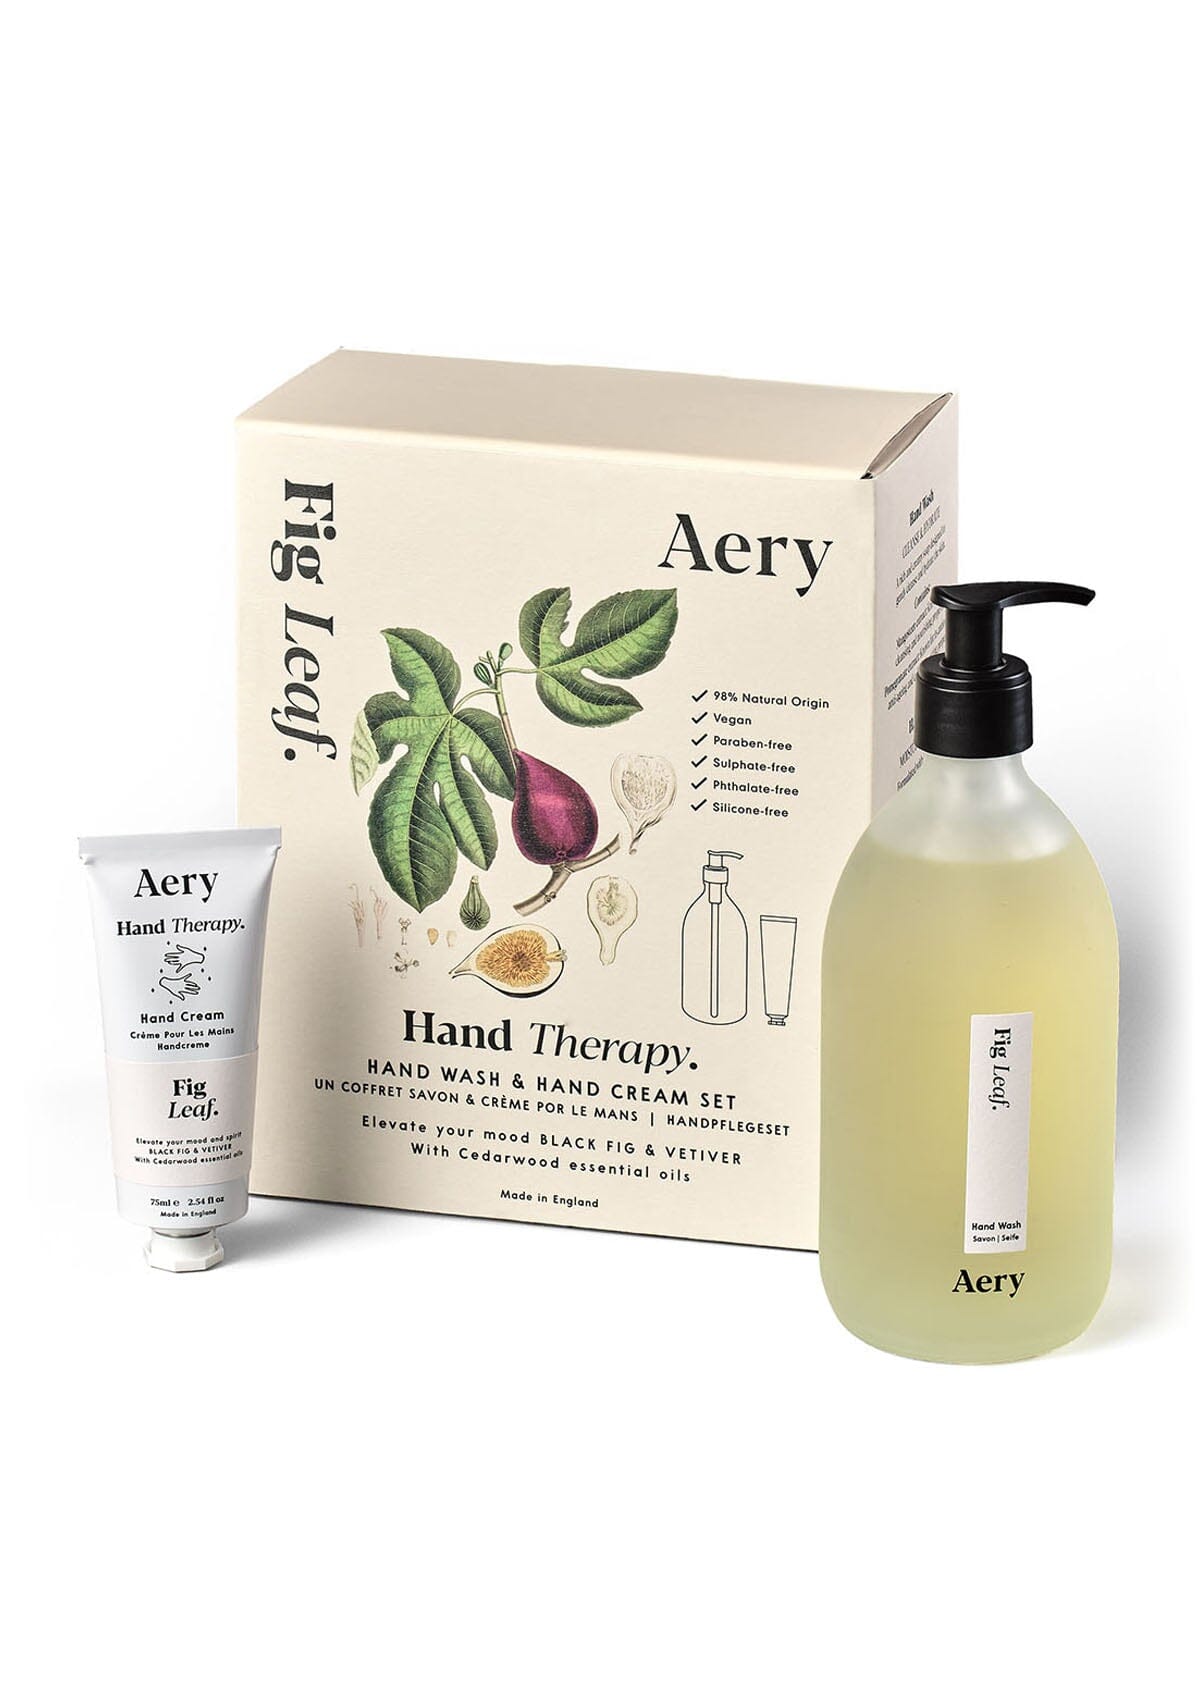 Cream Fig Leaf hand cream and wash set displayed next to product packaging on white background 